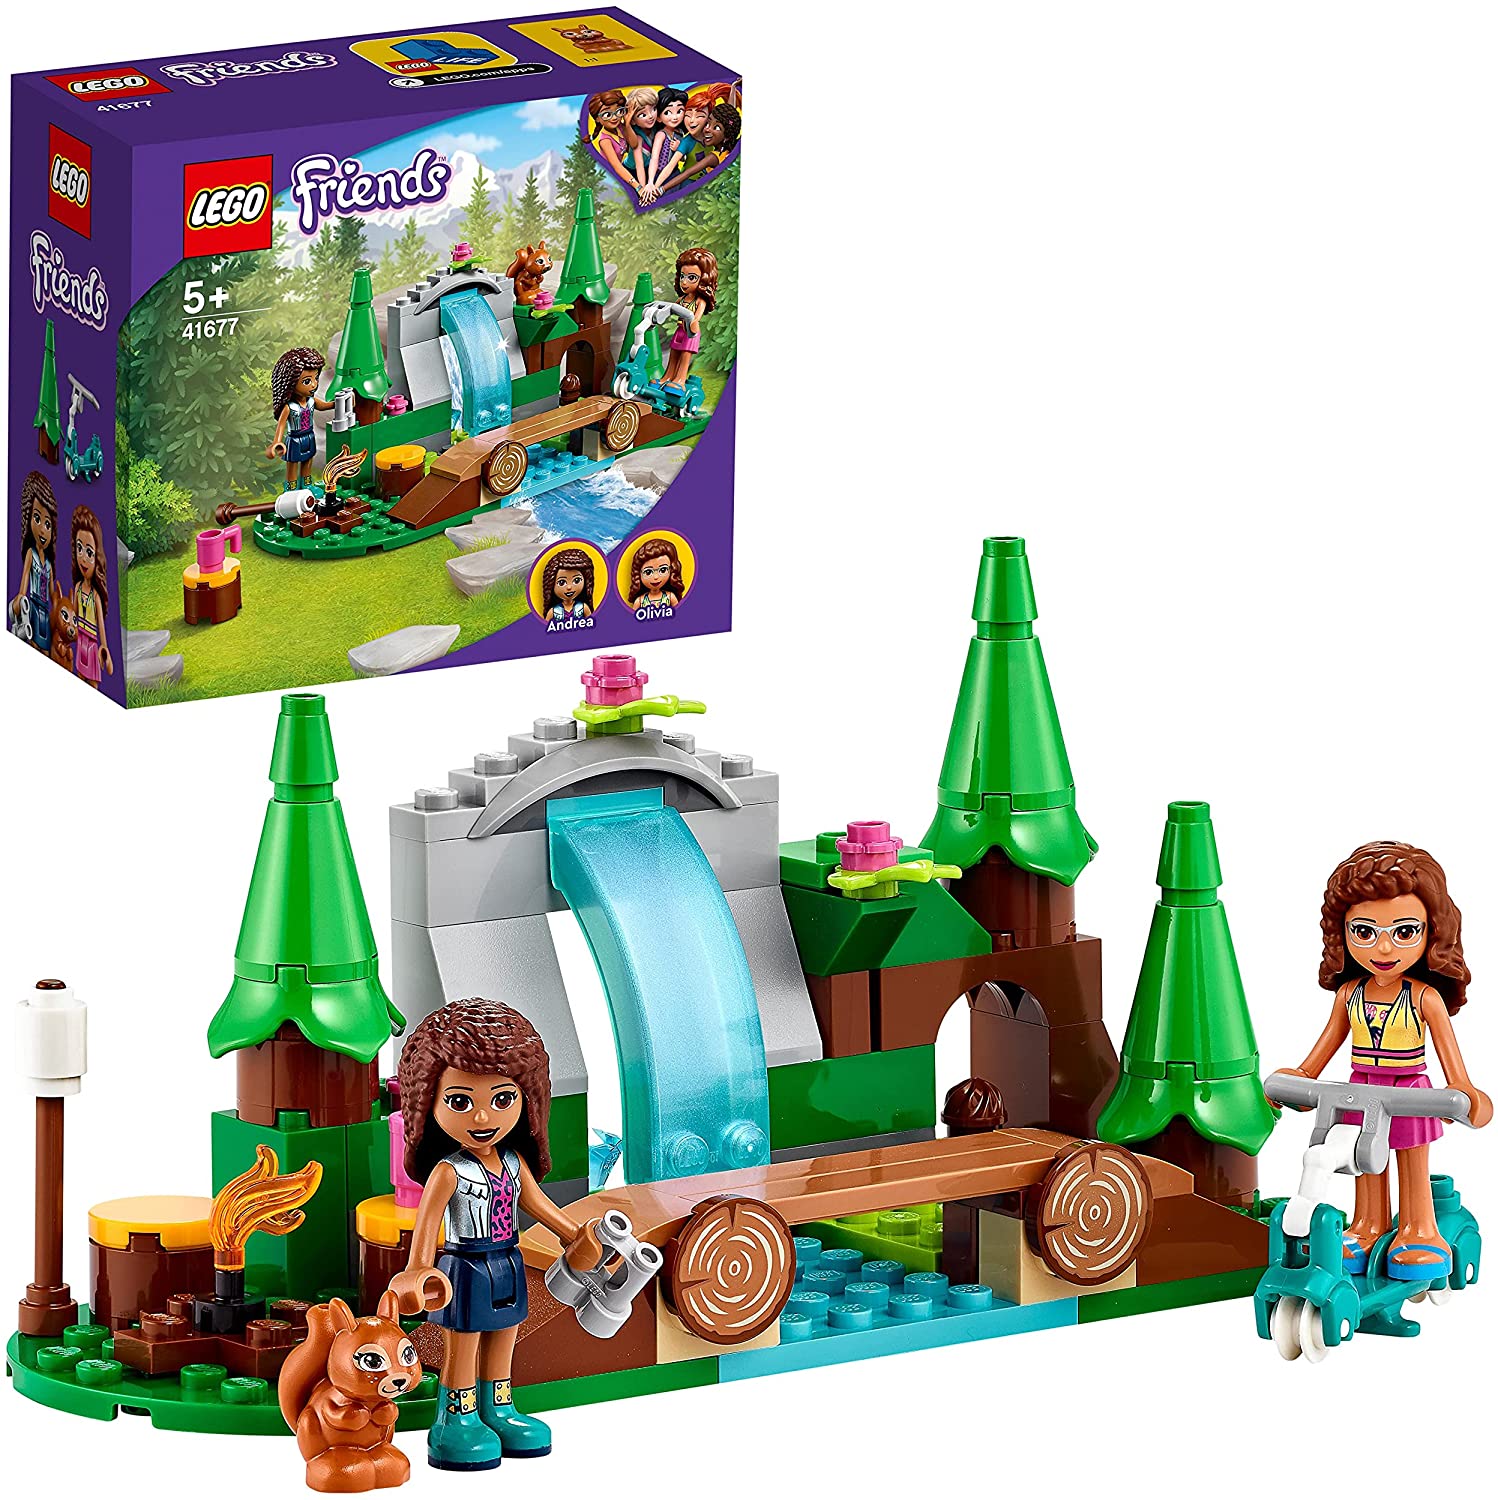 LEGO 41677 Lego Friends Waterfall in the Forest, Camping Toy from 5 Years w